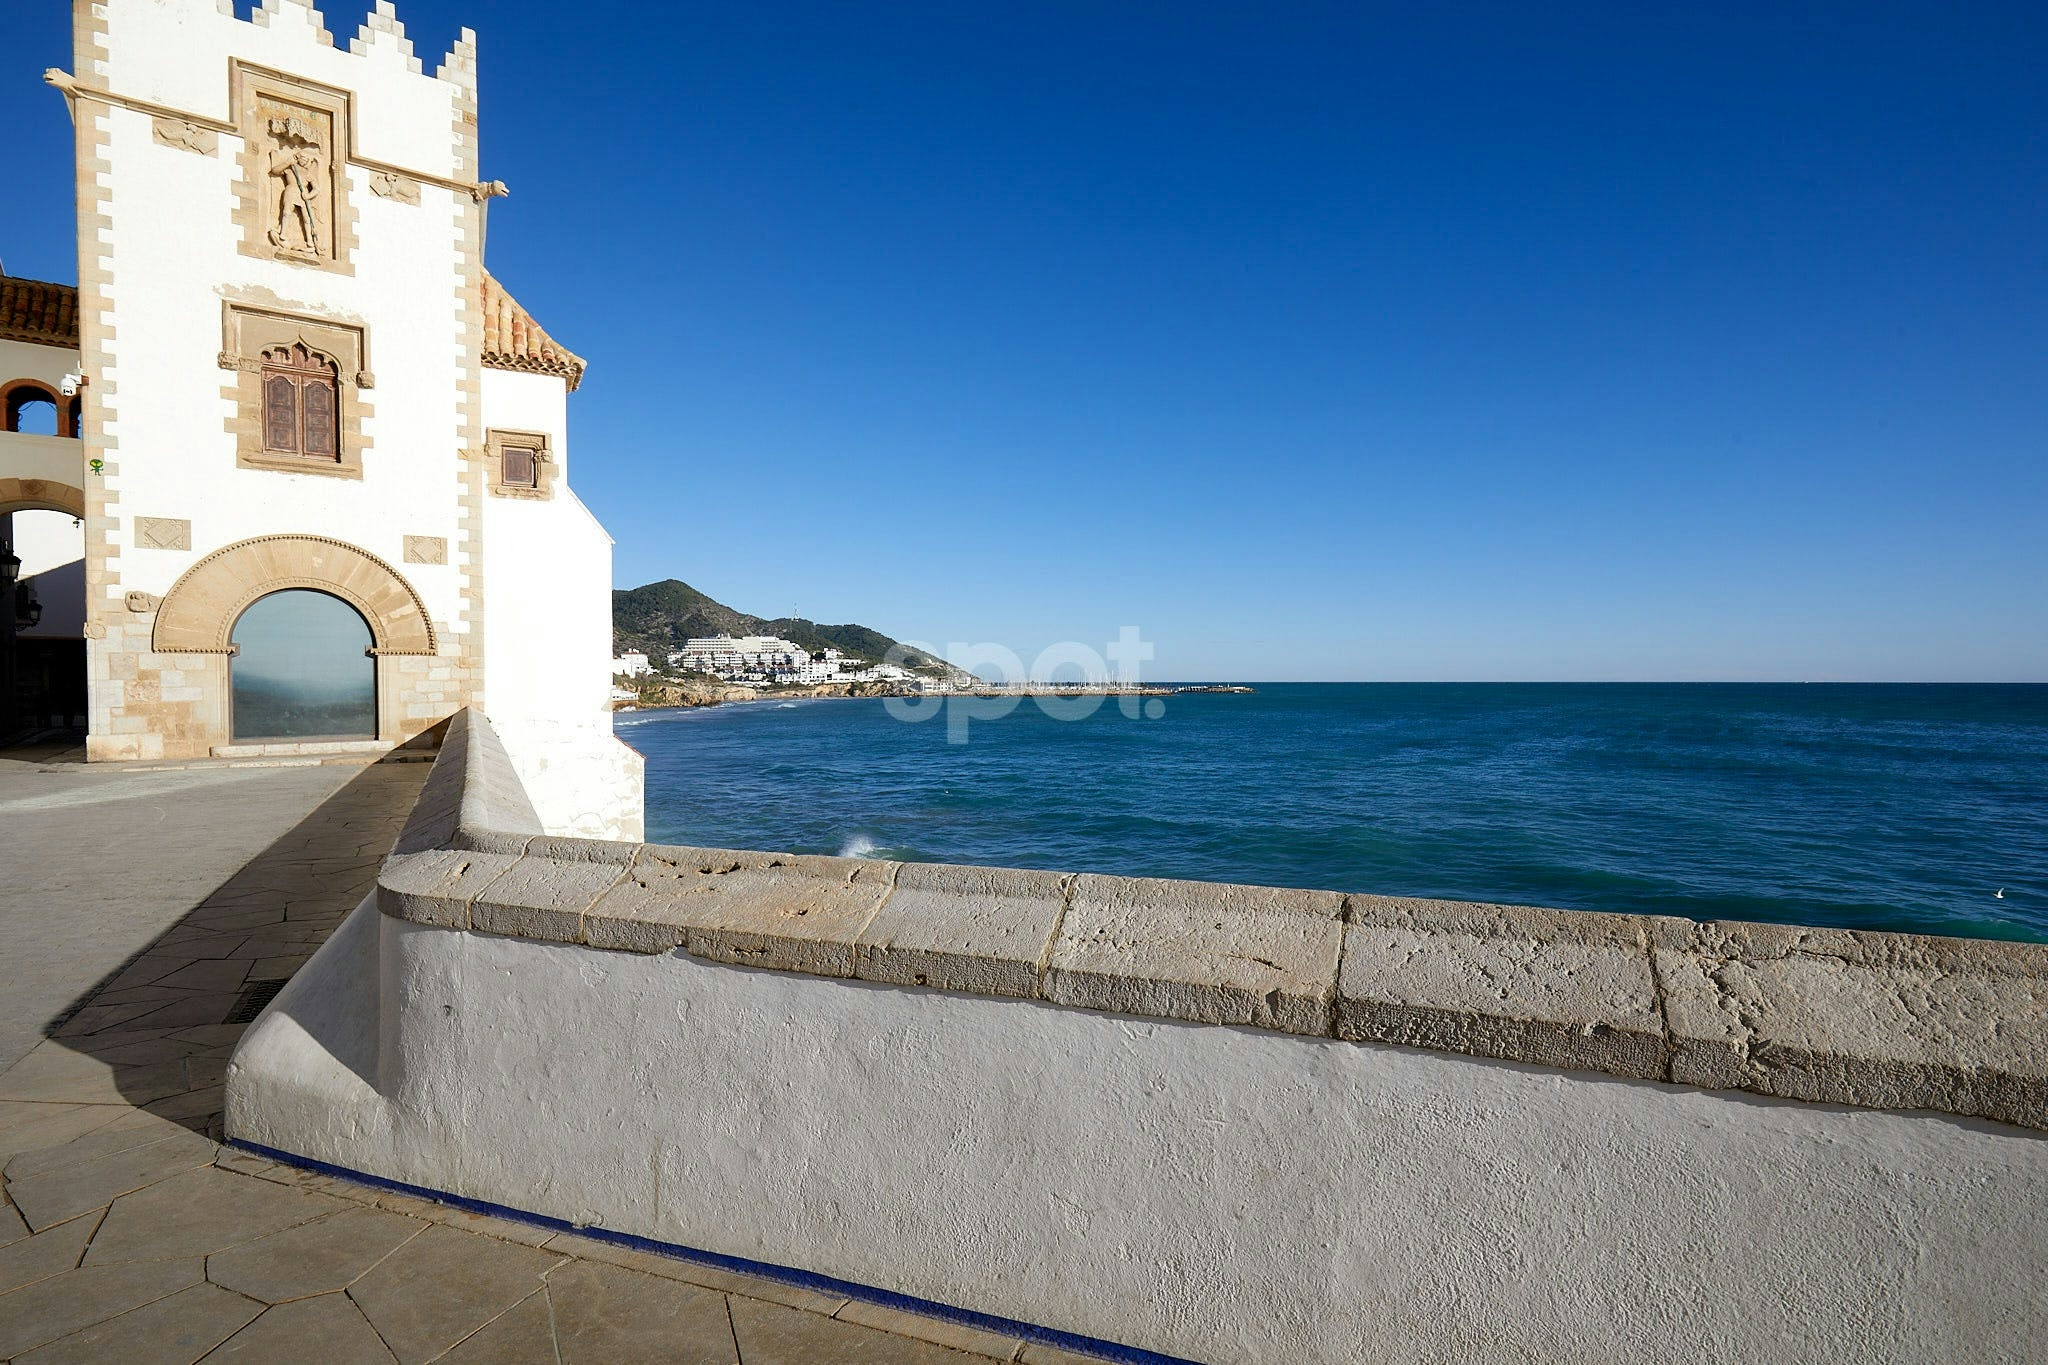 Sitges is a dream location